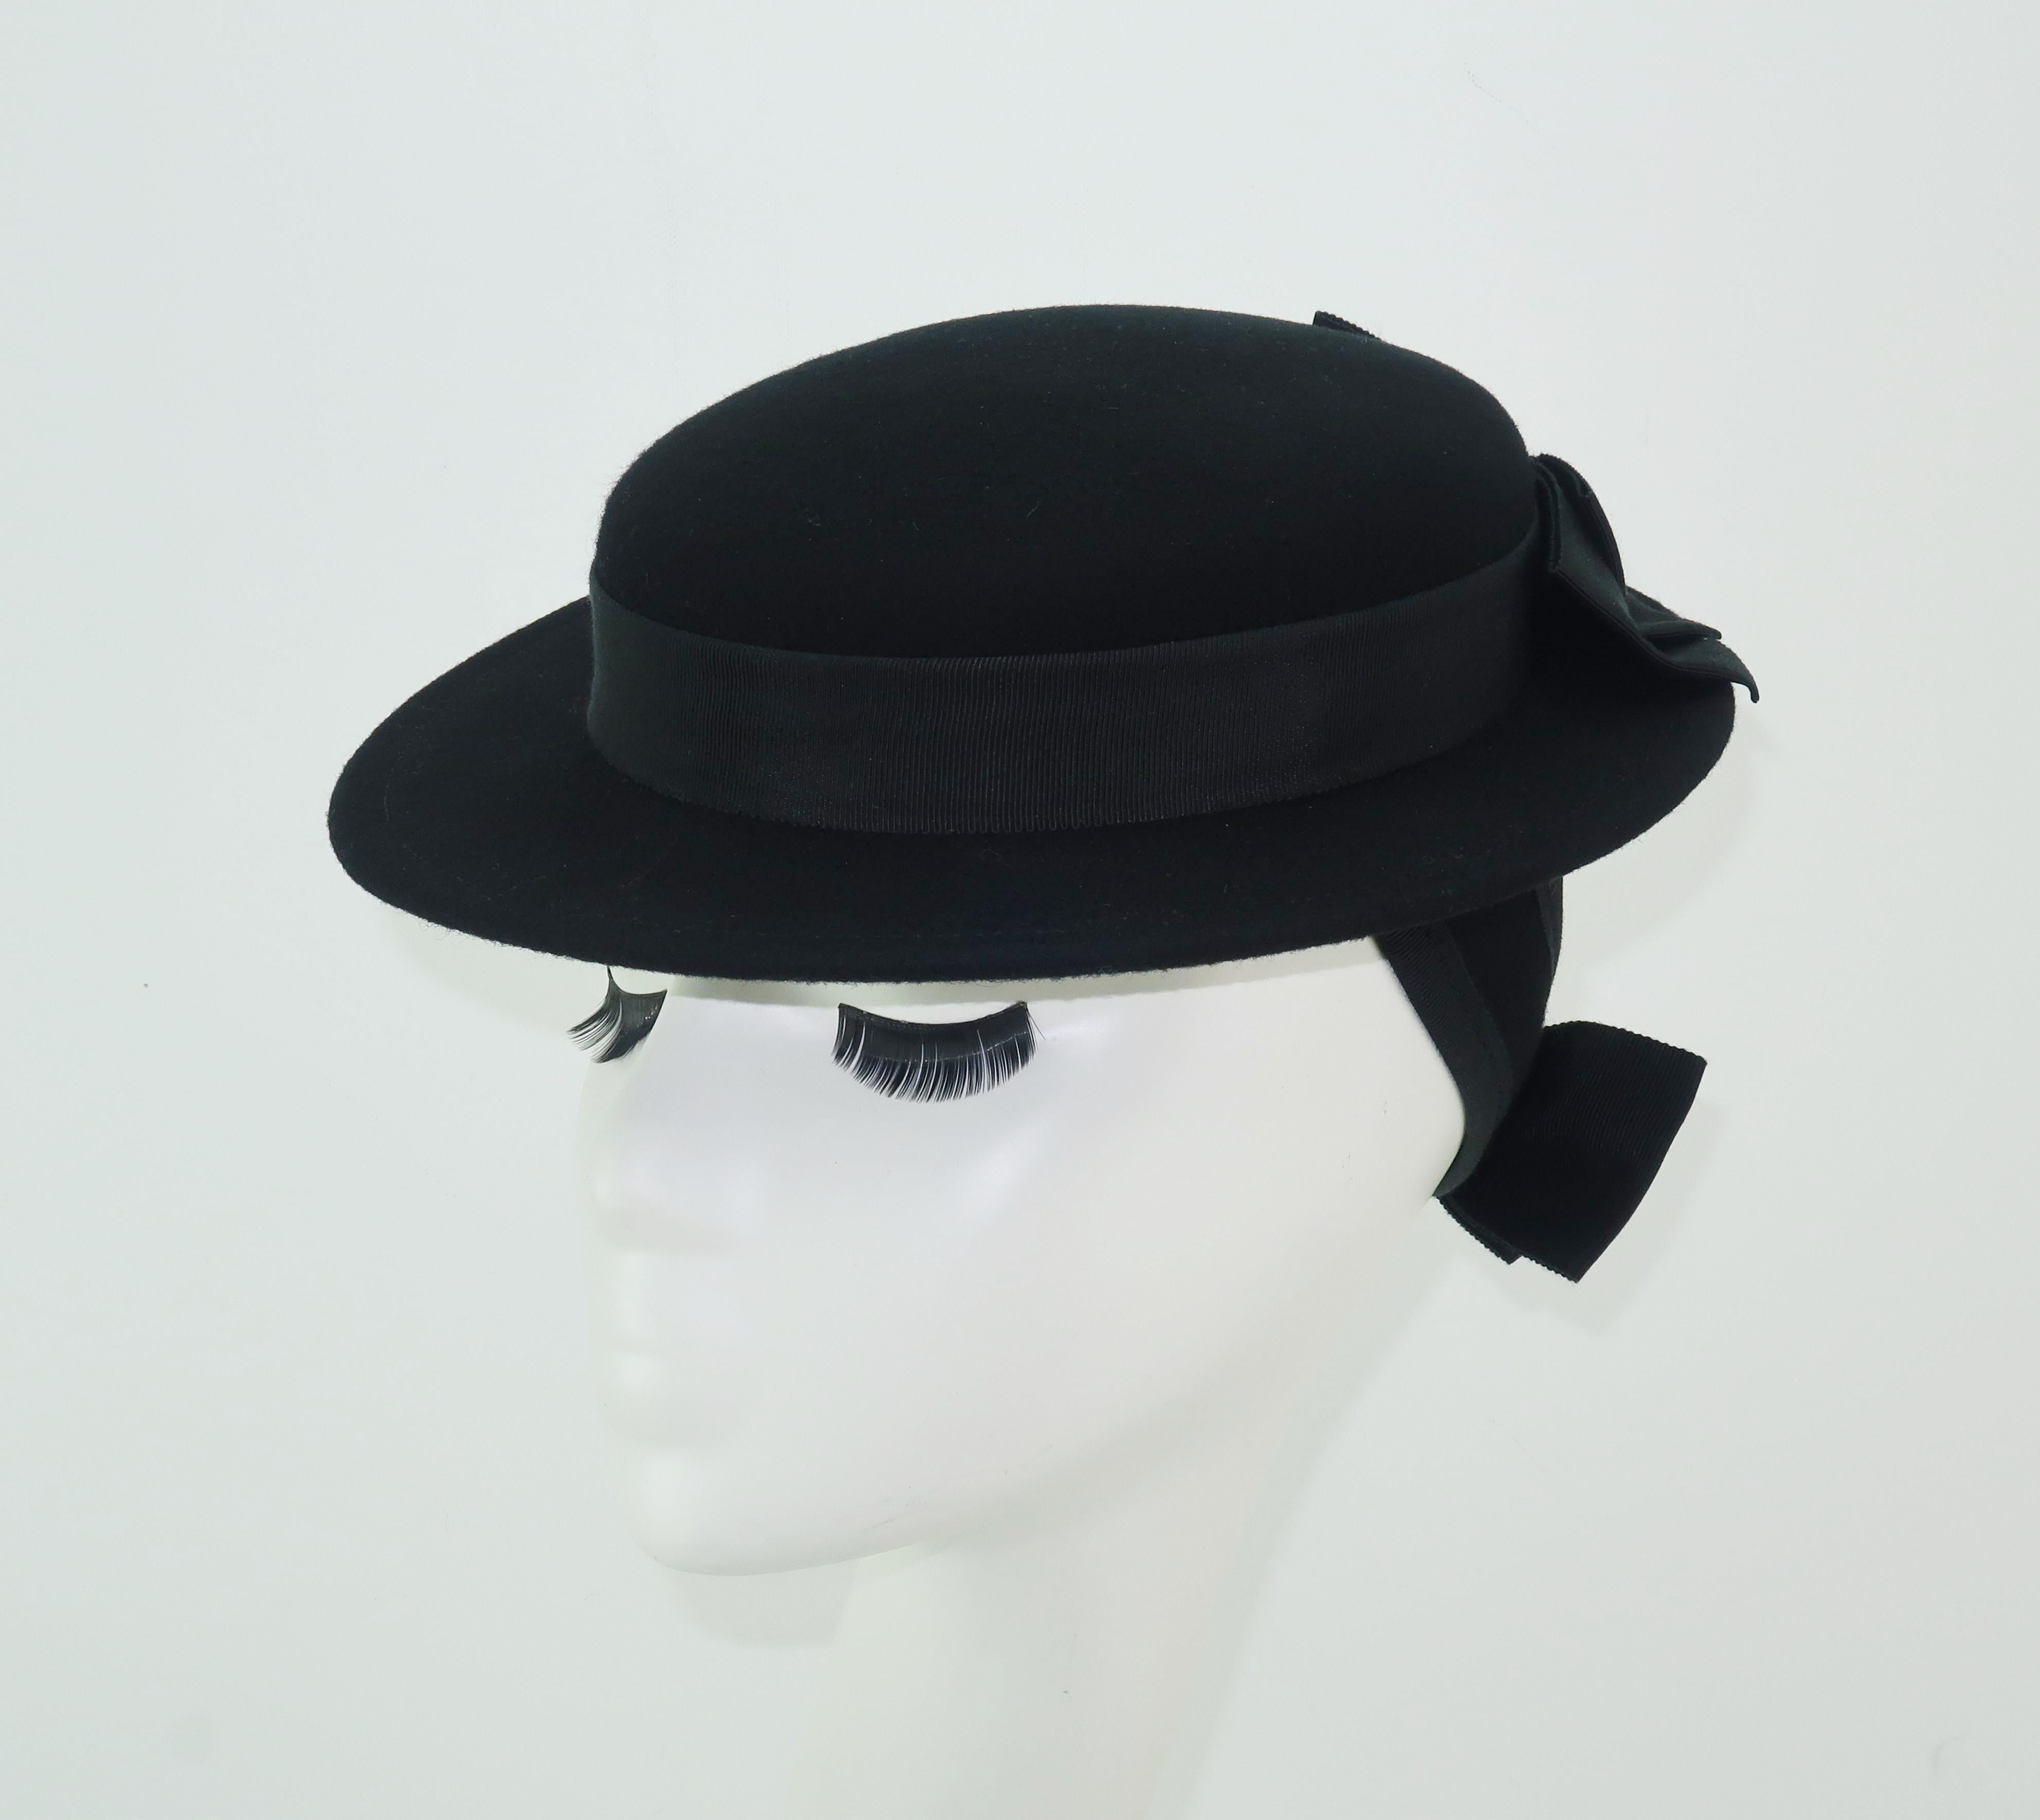 This Sonni hat is cute and clever!  A perfect combination for a 1950's revival of a classic 1940's 'tilt' hat silhouette in a versatile black wool felt edged in grosgrain ribbon and accented with bows at the back.  Tilt hats often provide back